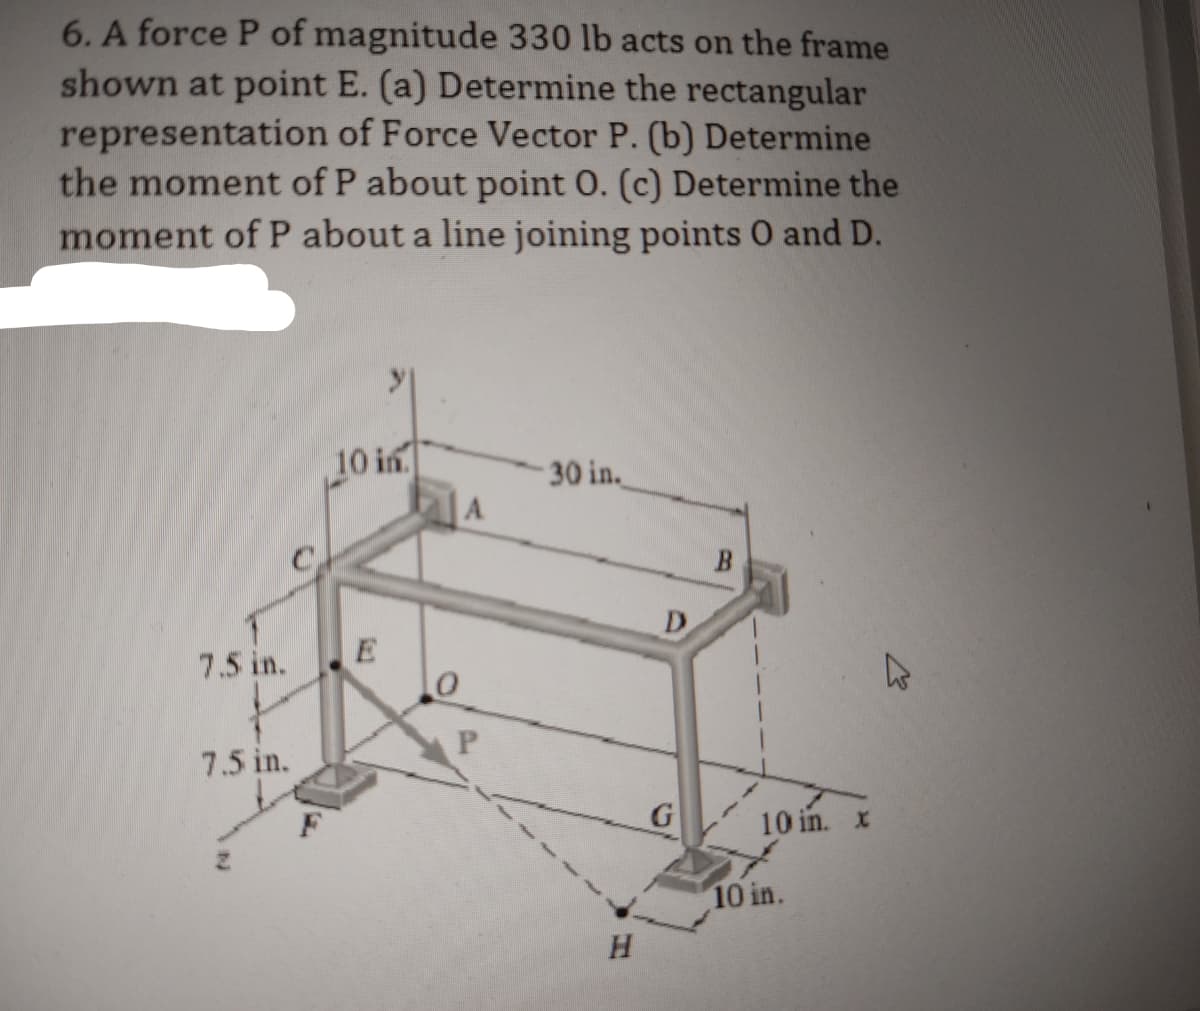 6. A force P of magnitude 330 lb acts on the frame
shown at point E. (a) Determine the rectangular
representation of Force Vector P. (b) Determine
the moment of P about point O. (c) Determine the
moment of P about a line joining points O and D.
7.5 in.
7.5 in.
10 in
E
A
P
30 in.
H
D
G
10 in. x
10 in.
▷